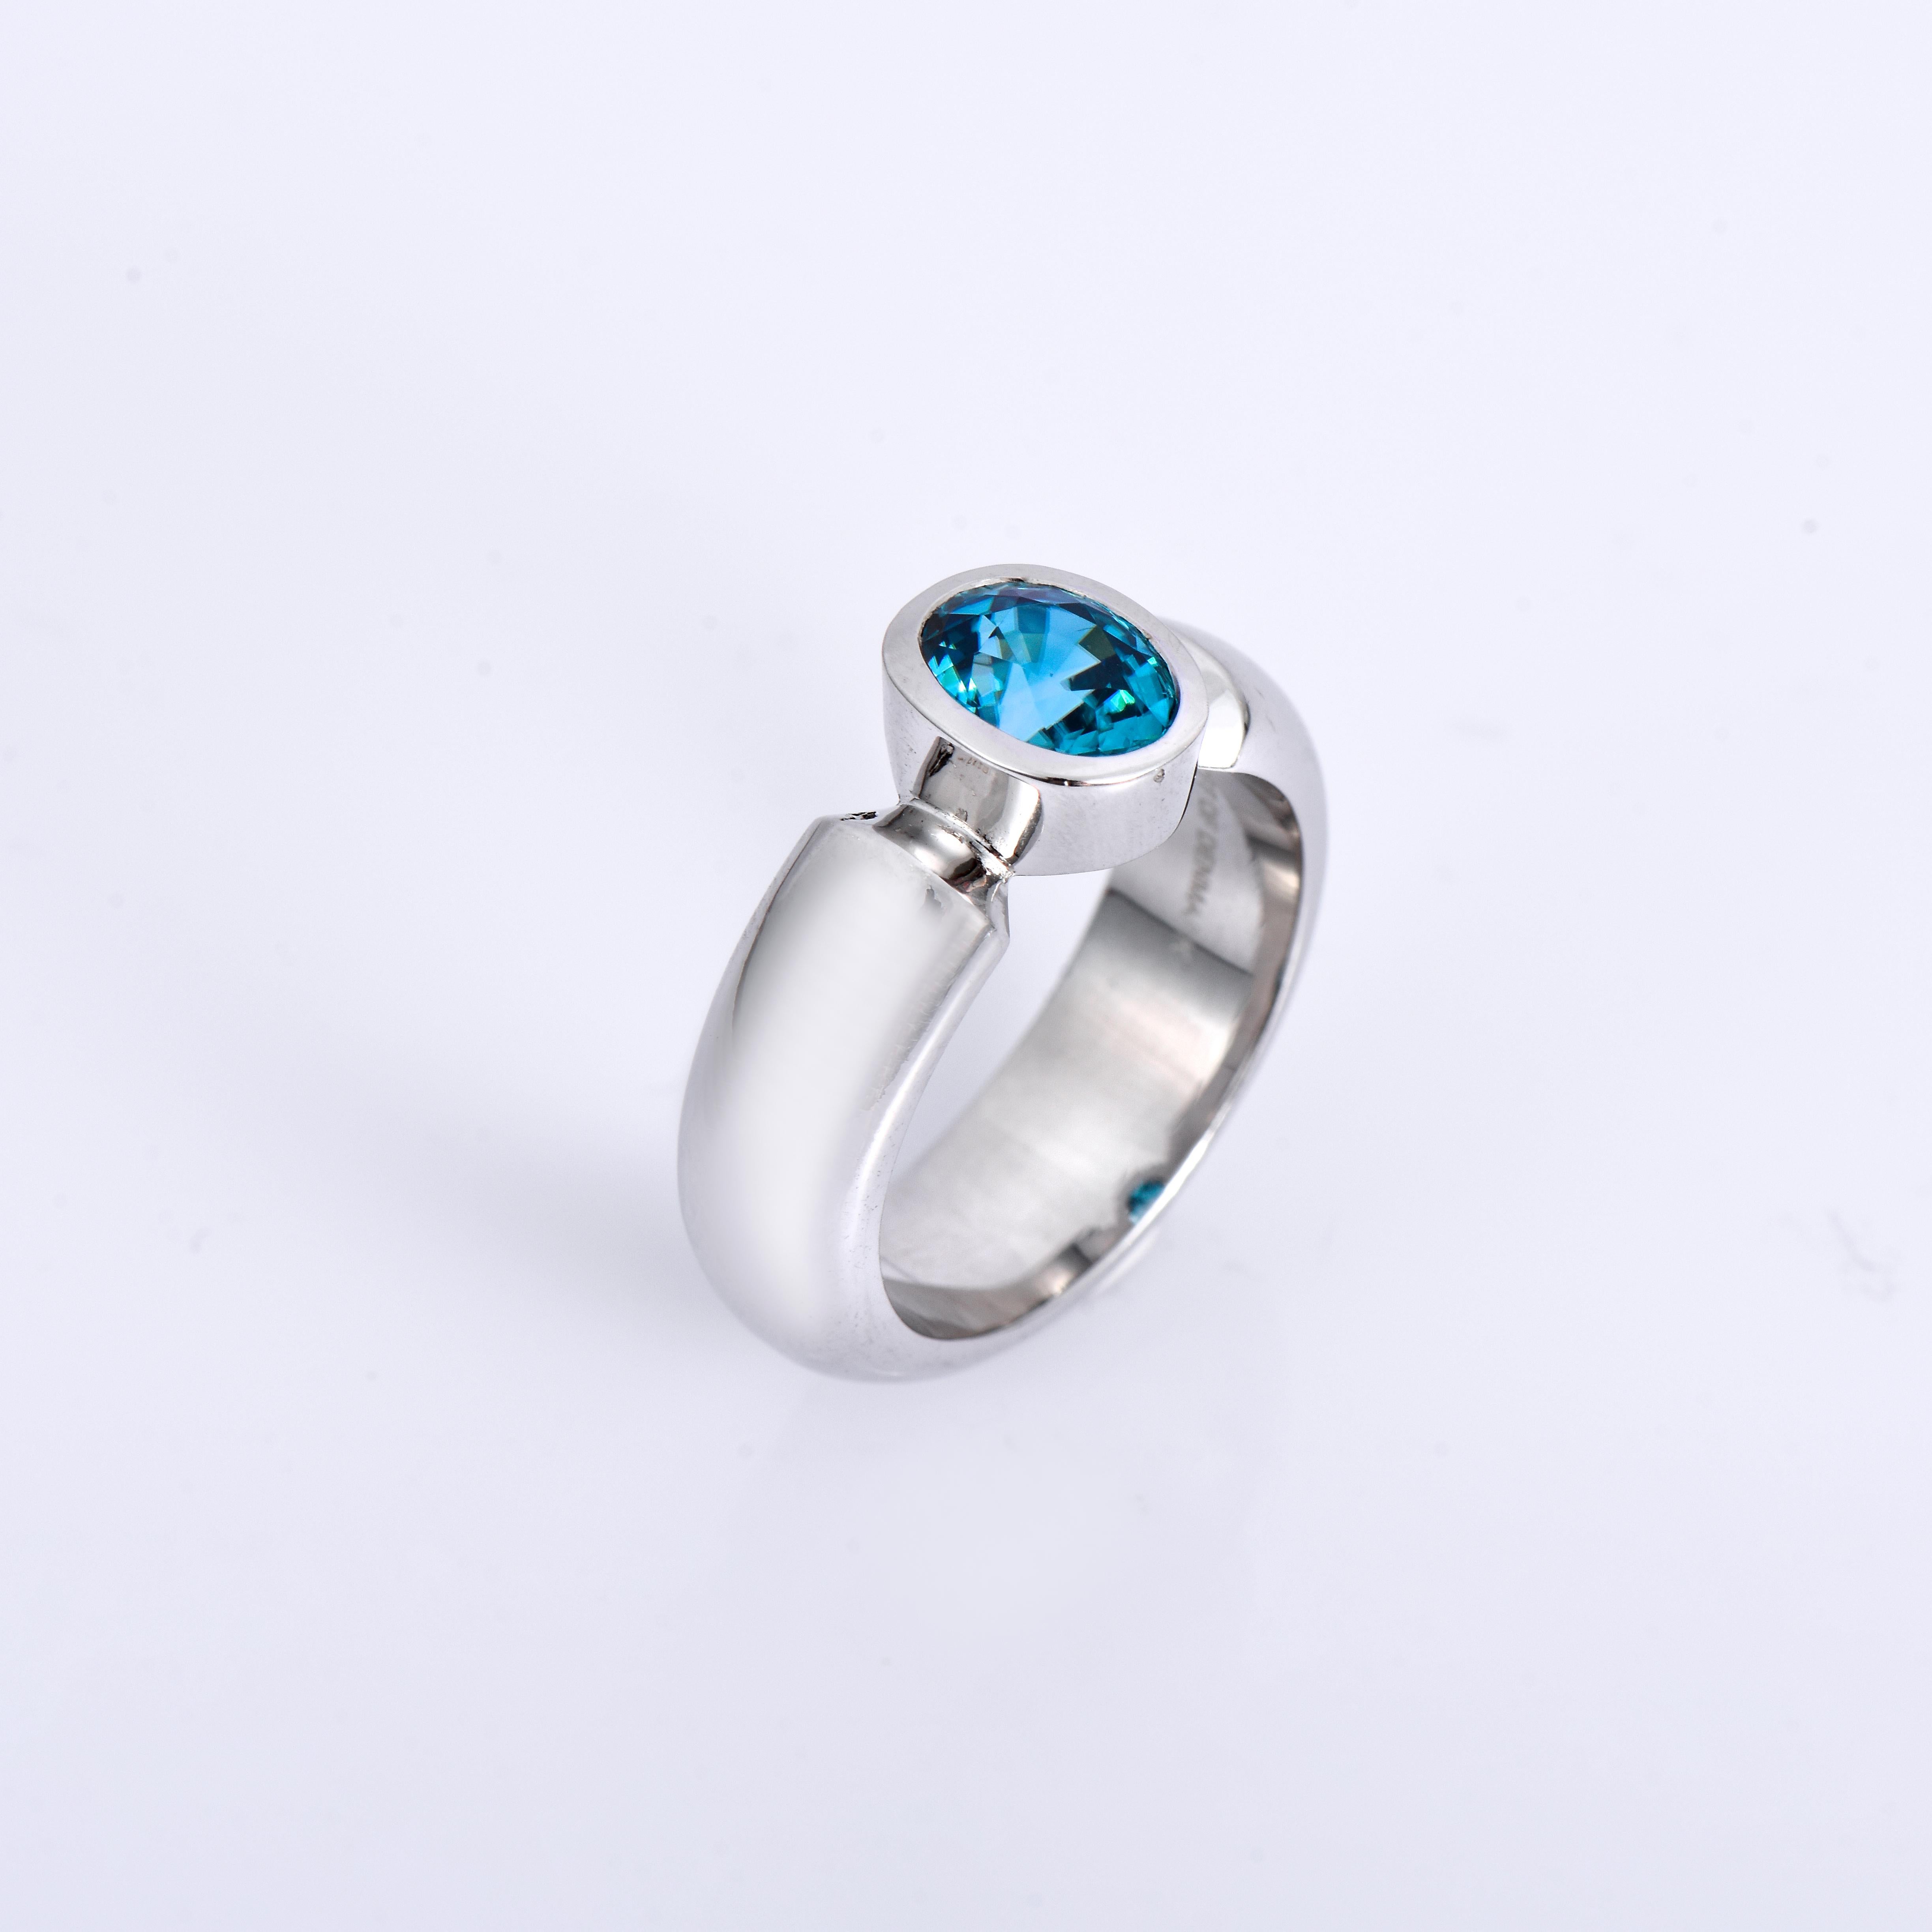 Orloff of Denmark; 925 Sterling Silver Ring set with a 2.38 carat Natural Cambodian Blue Zircon.

This piece has been meticulously hand-crafted out of 925 sterling silver.
At the center lies a vibrant Cambodian blue zircon, its strong blue color